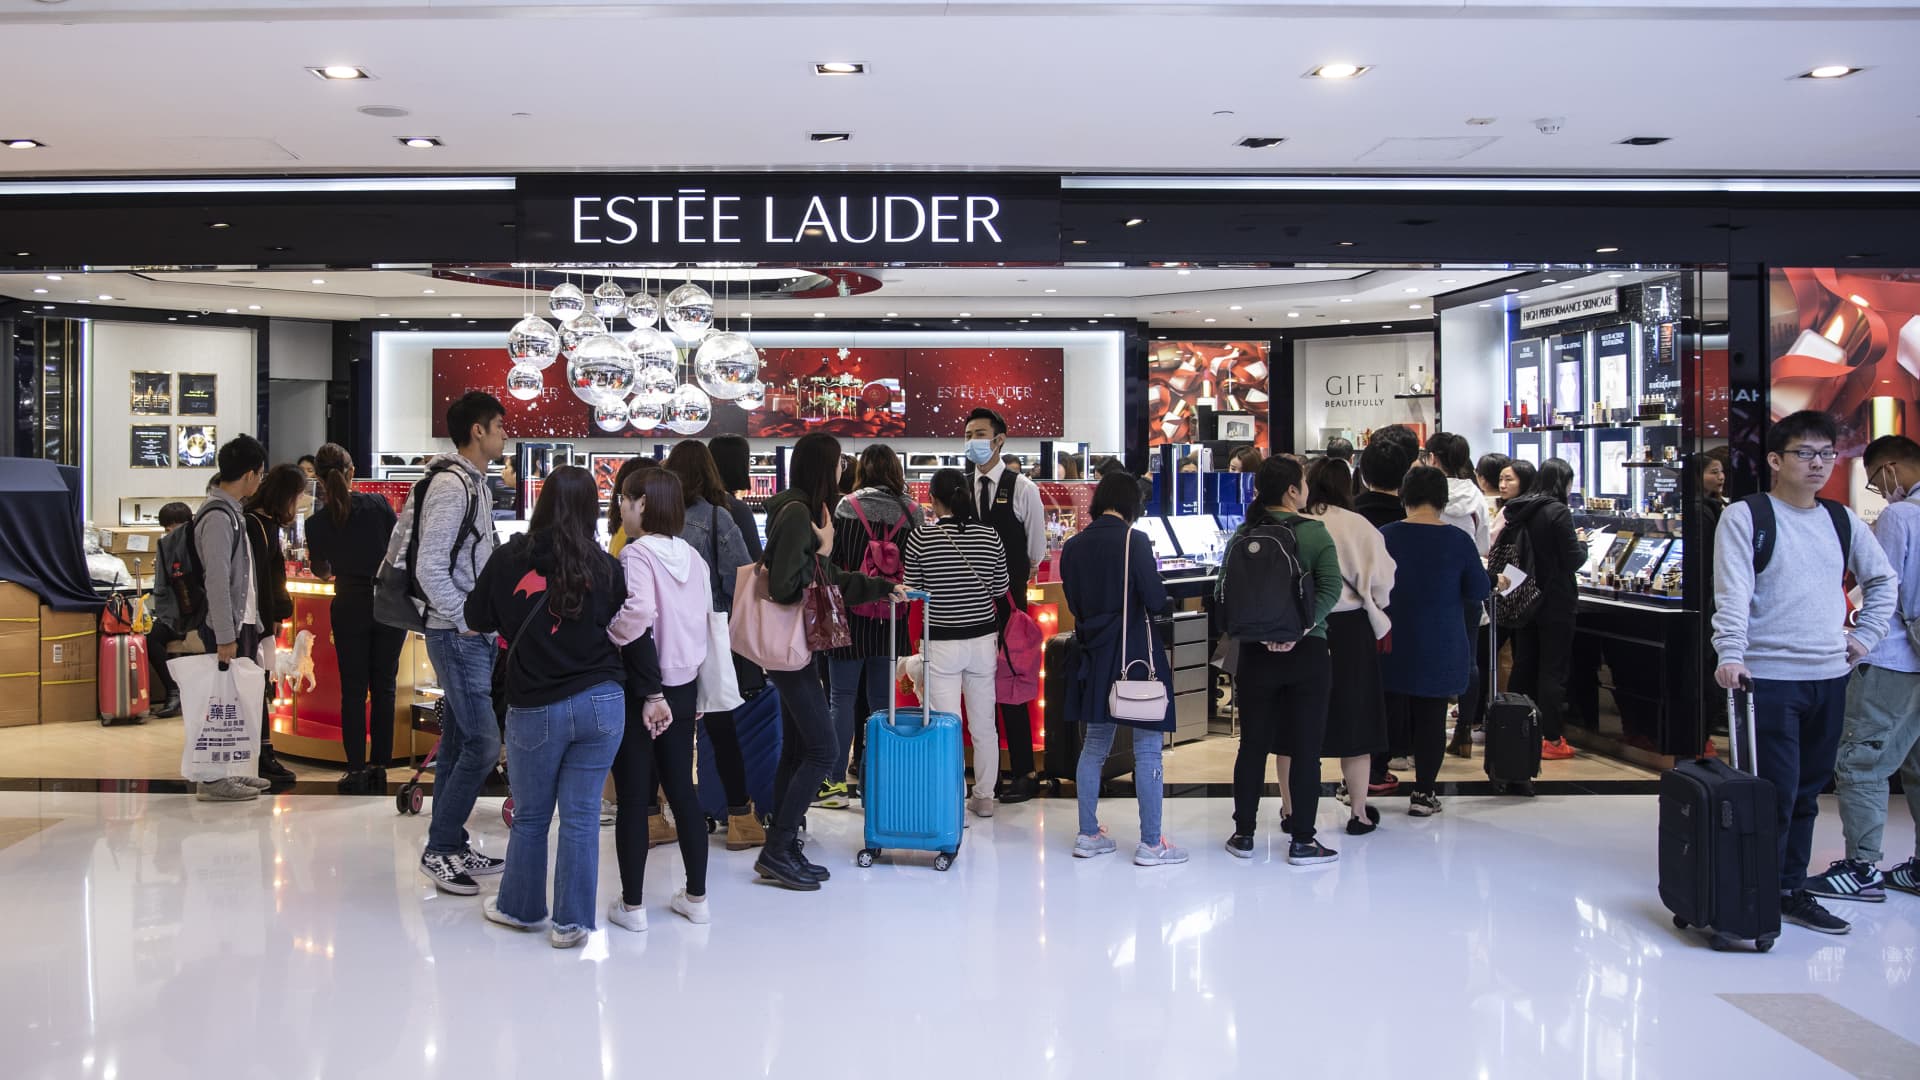 We still see Estee Lauder shares as a buy on weakness despite downbeat guidance